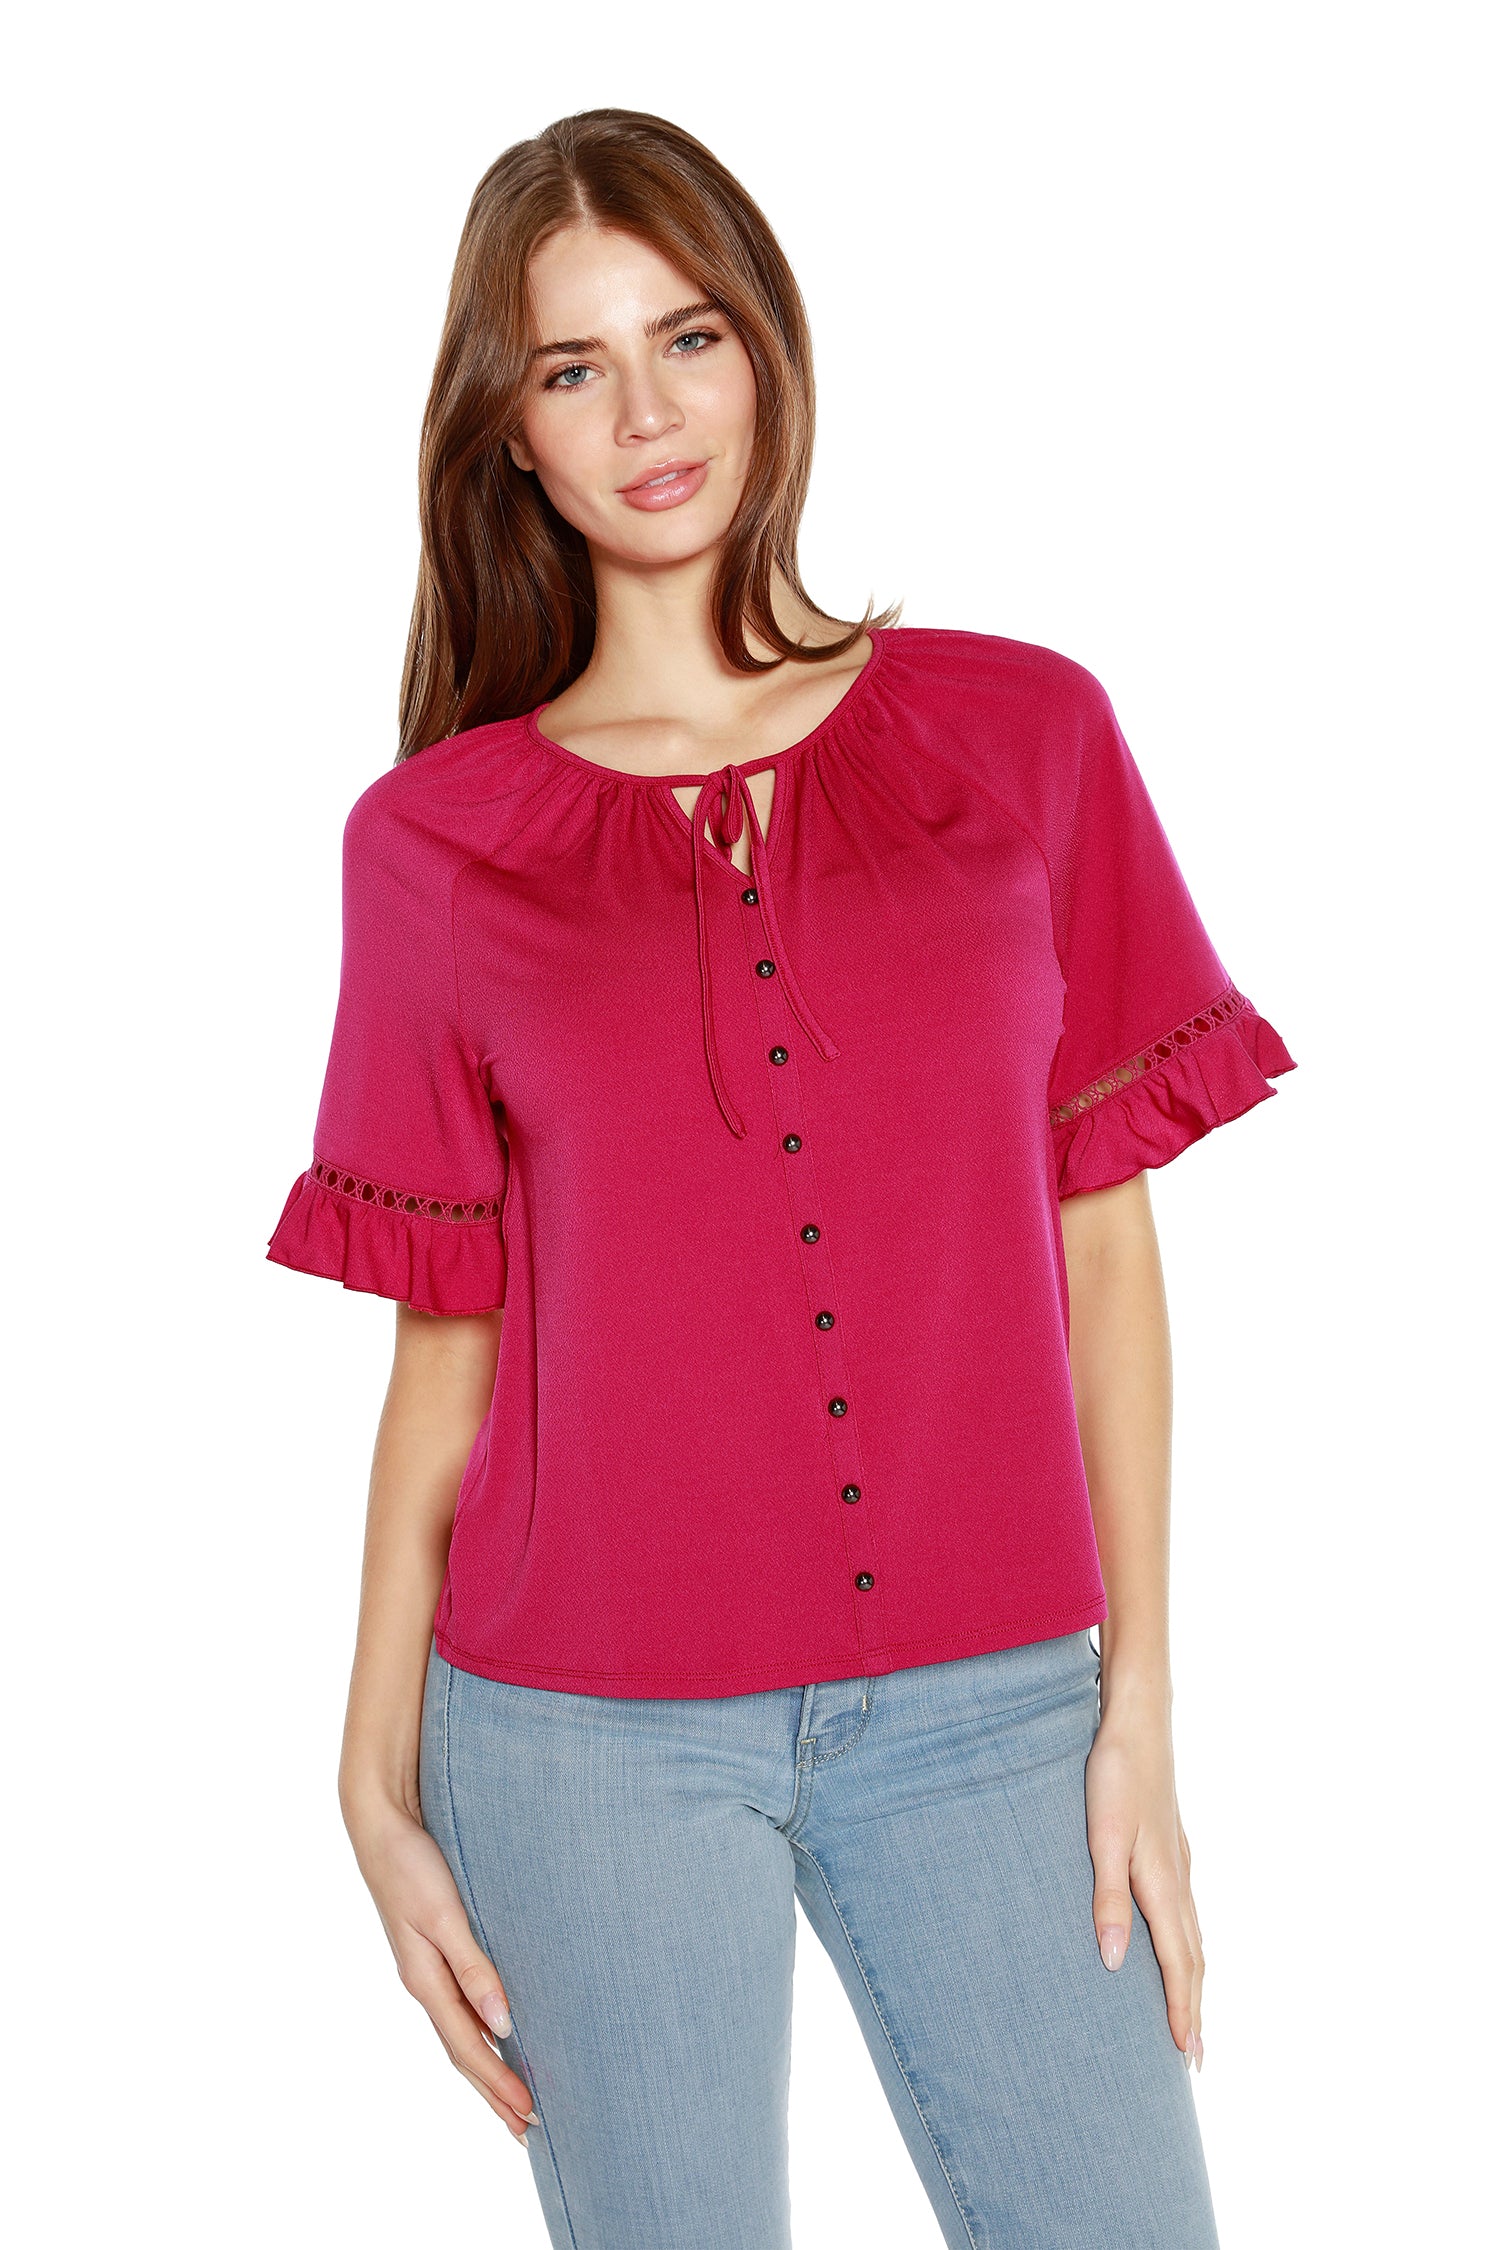 Women’s Ruffled Raglan Bell Sleeve Tunic with Ladder Lace